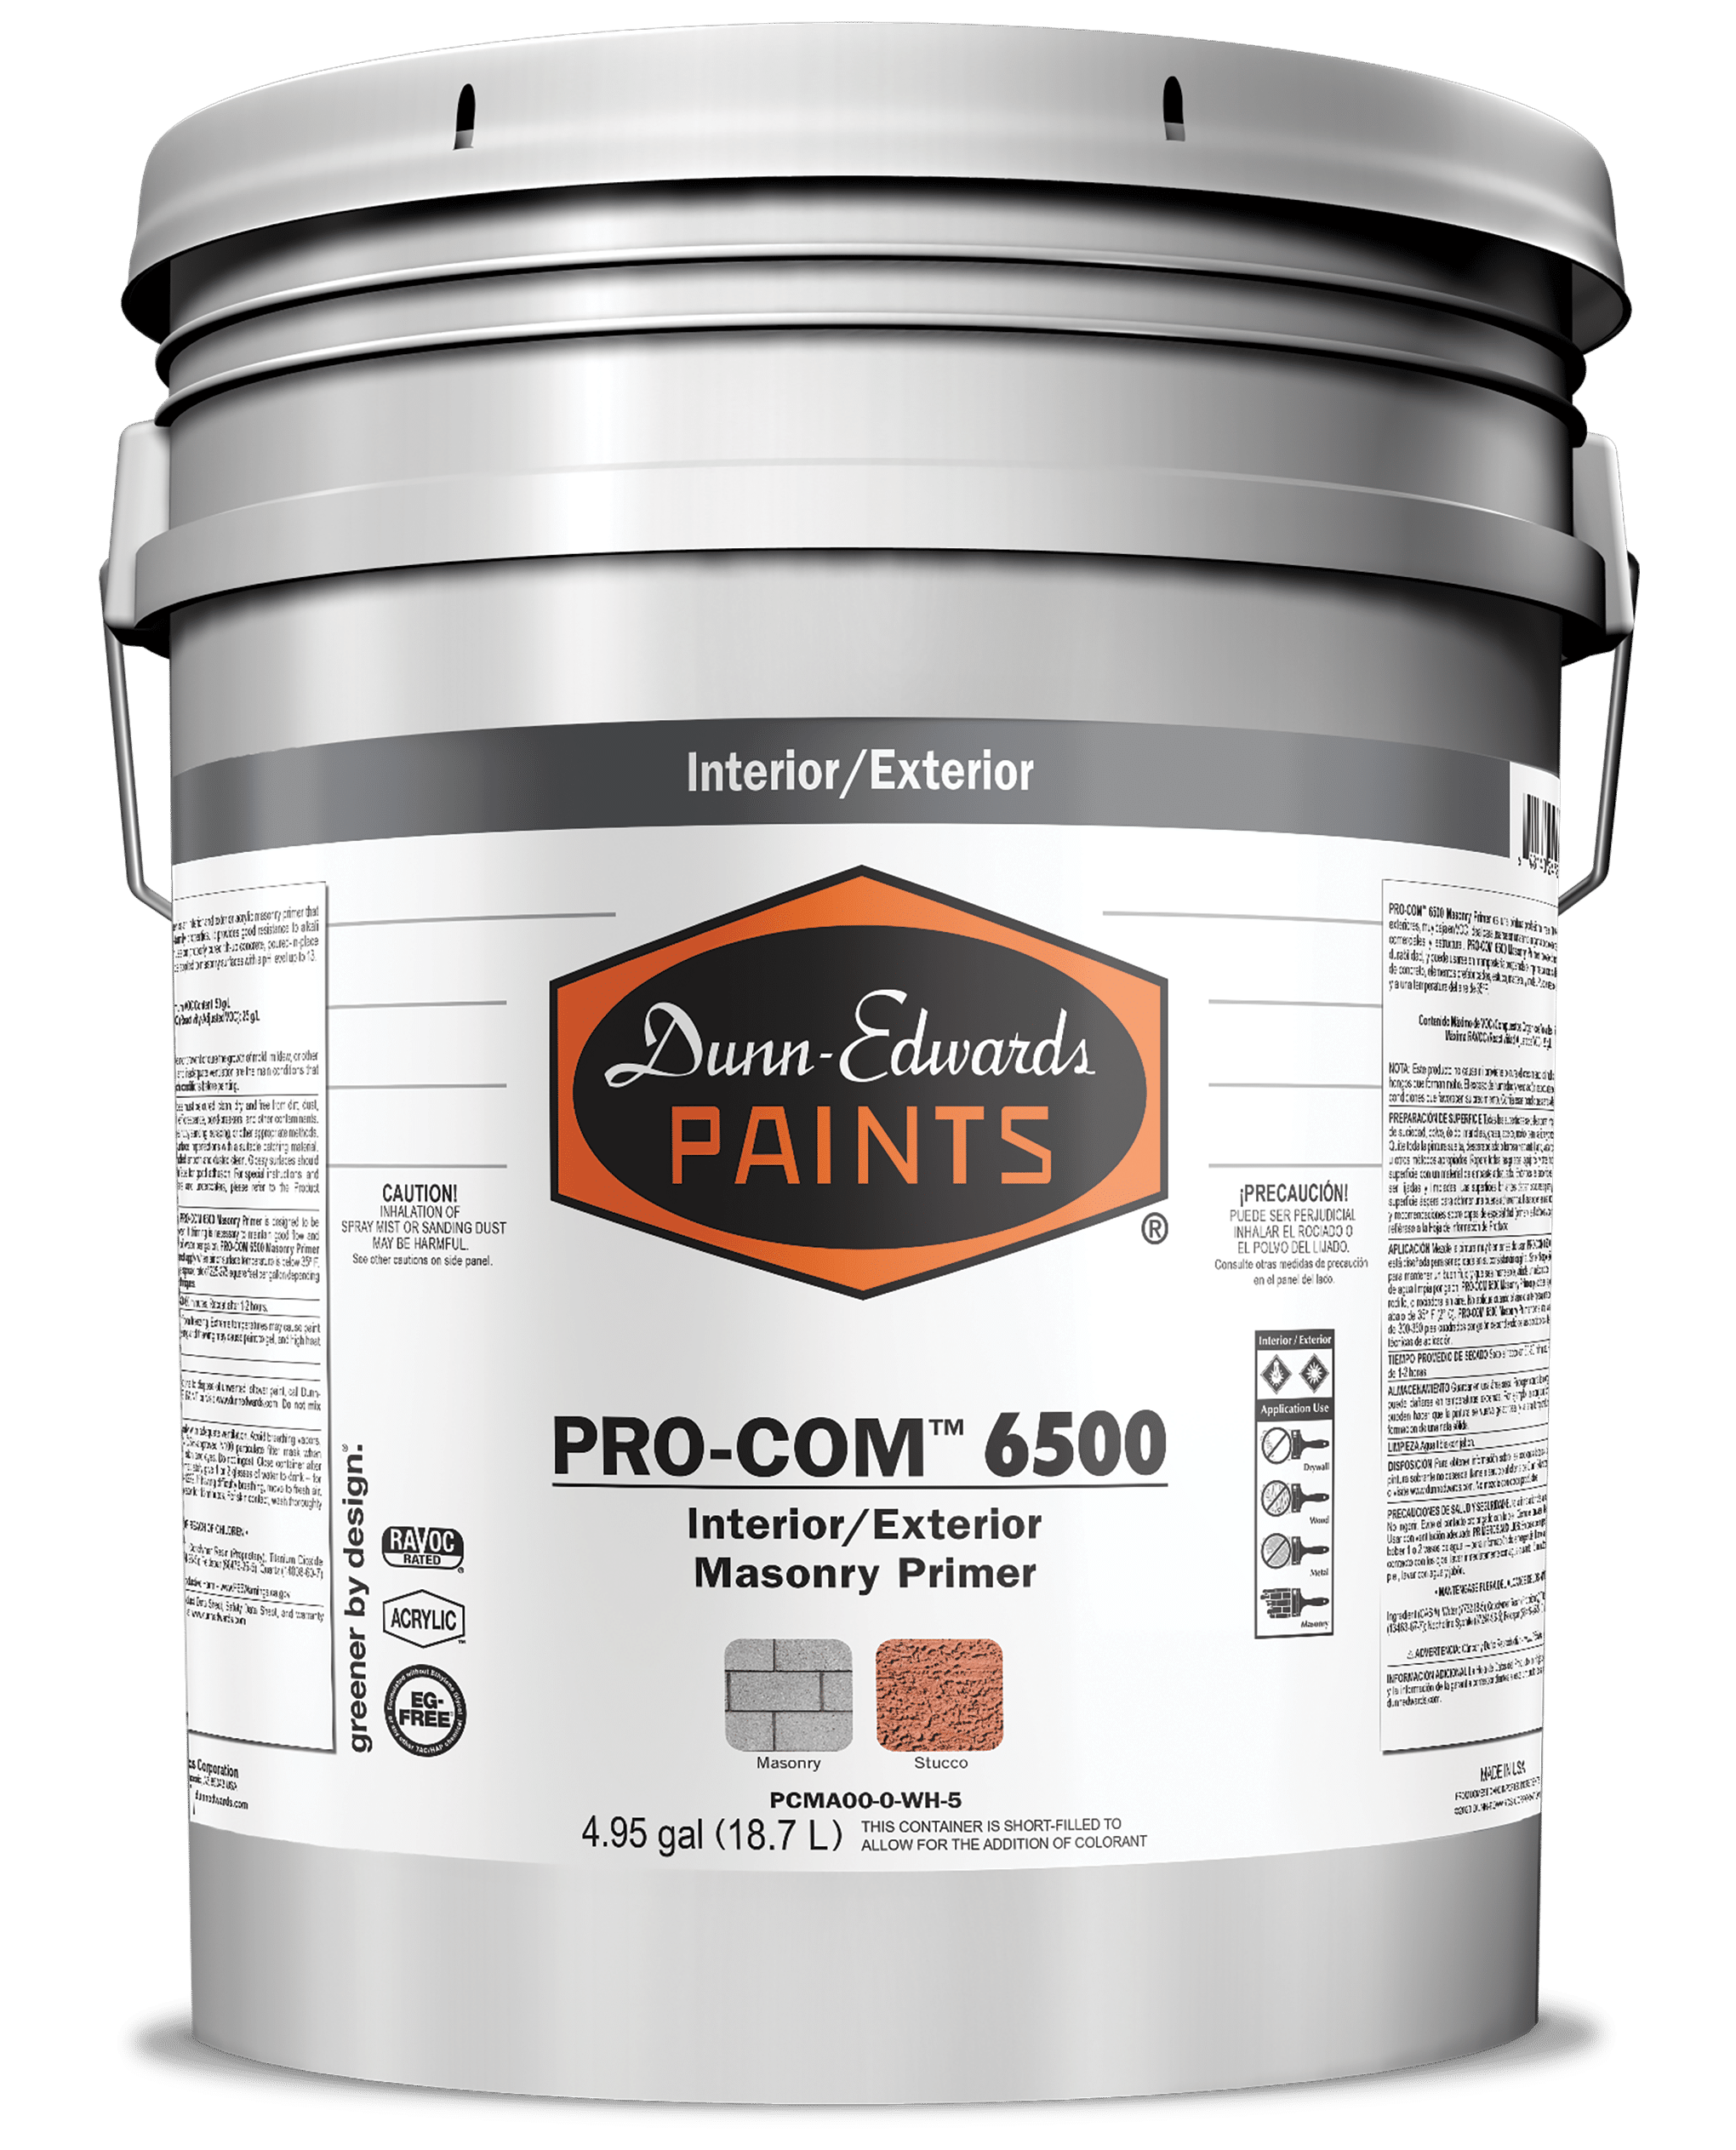 Dunn Edwards 146 Light Sage Precisely Matched For Paint and Spray Paint